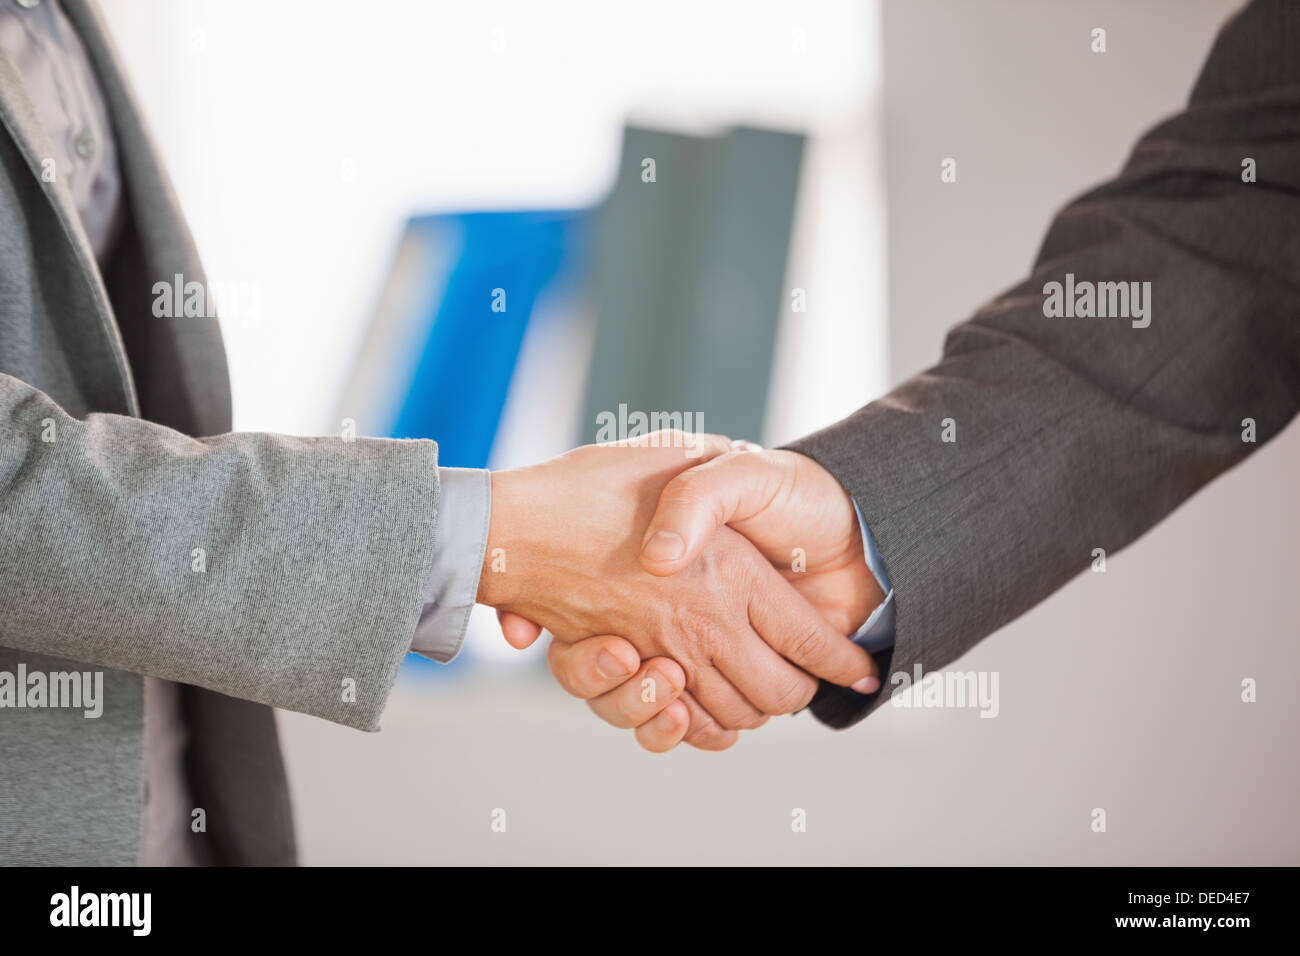 Two people having a handshake in an office Stock Photo